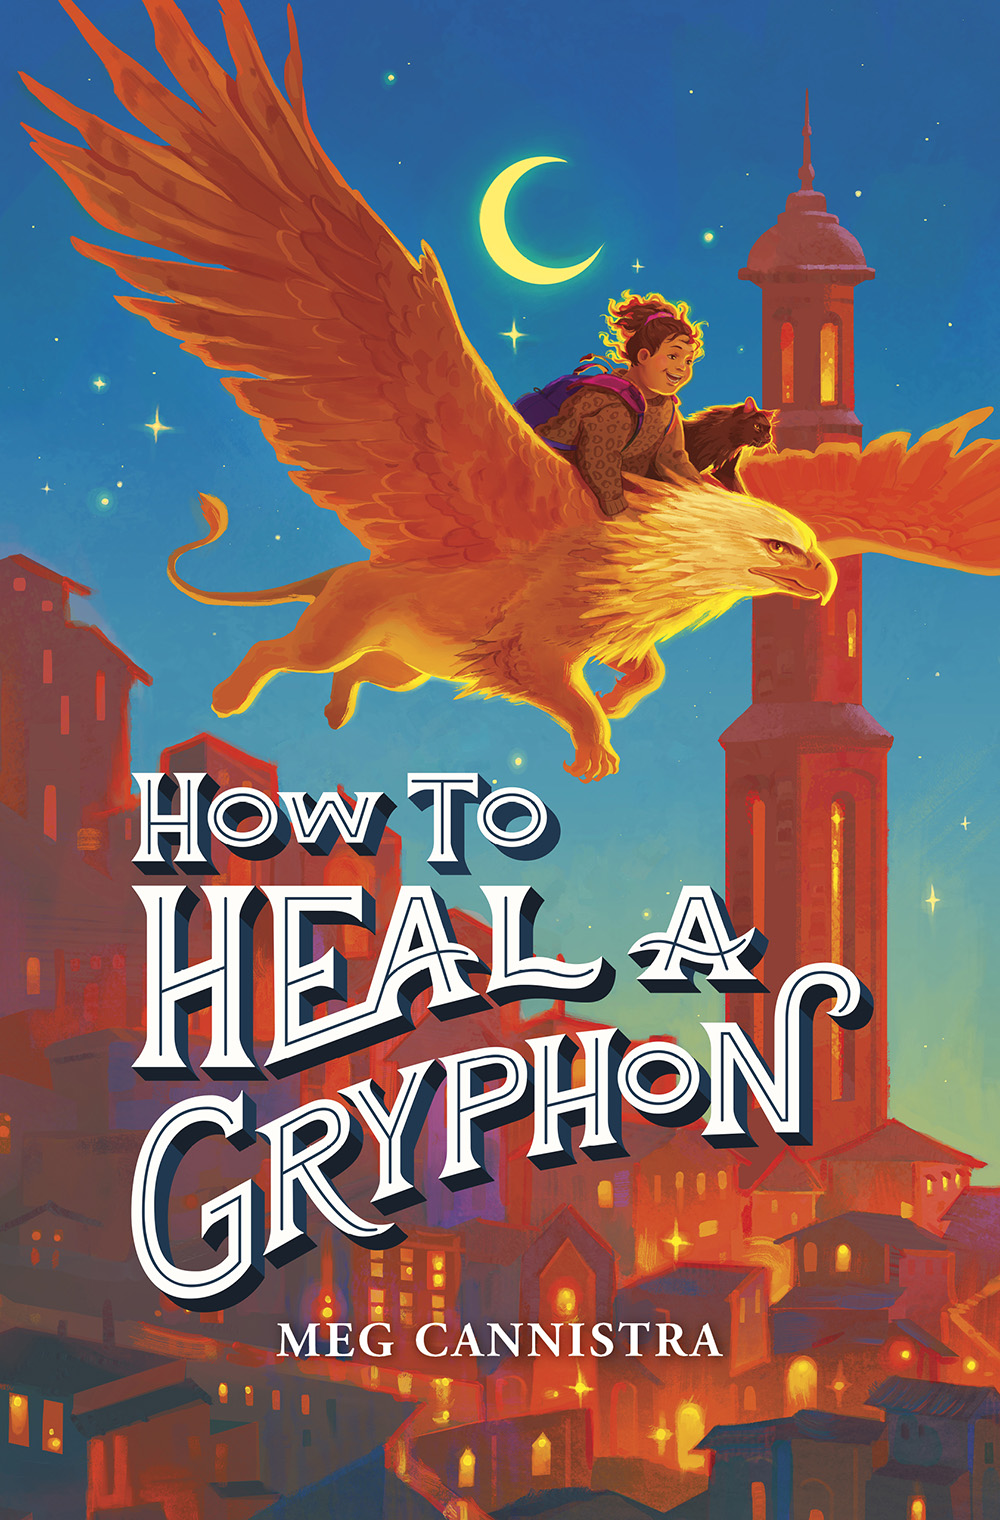 HowToHealAGryphon_Final Cover